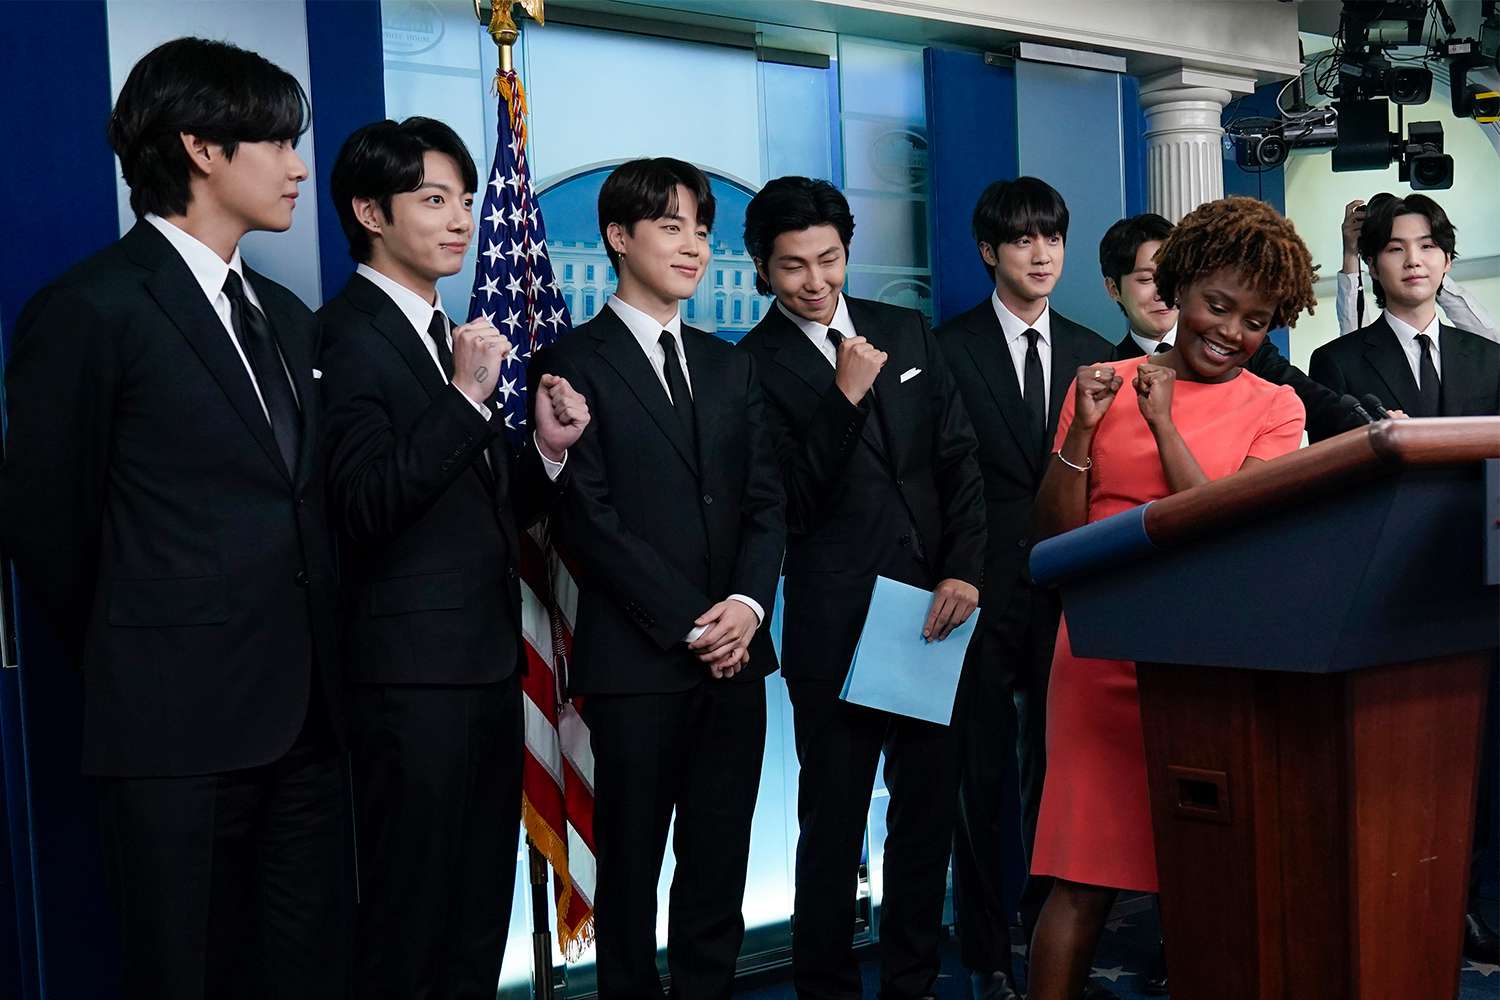 Members of the K-pop supergroup BTS, from left, V, Jungkook, Jimin, RM, Jin, J-Hope, Suga, join White House press secretary Karine Jean-Pierre during the daily briefing at the White House in Washington, Tuesday, May 31, 2022.